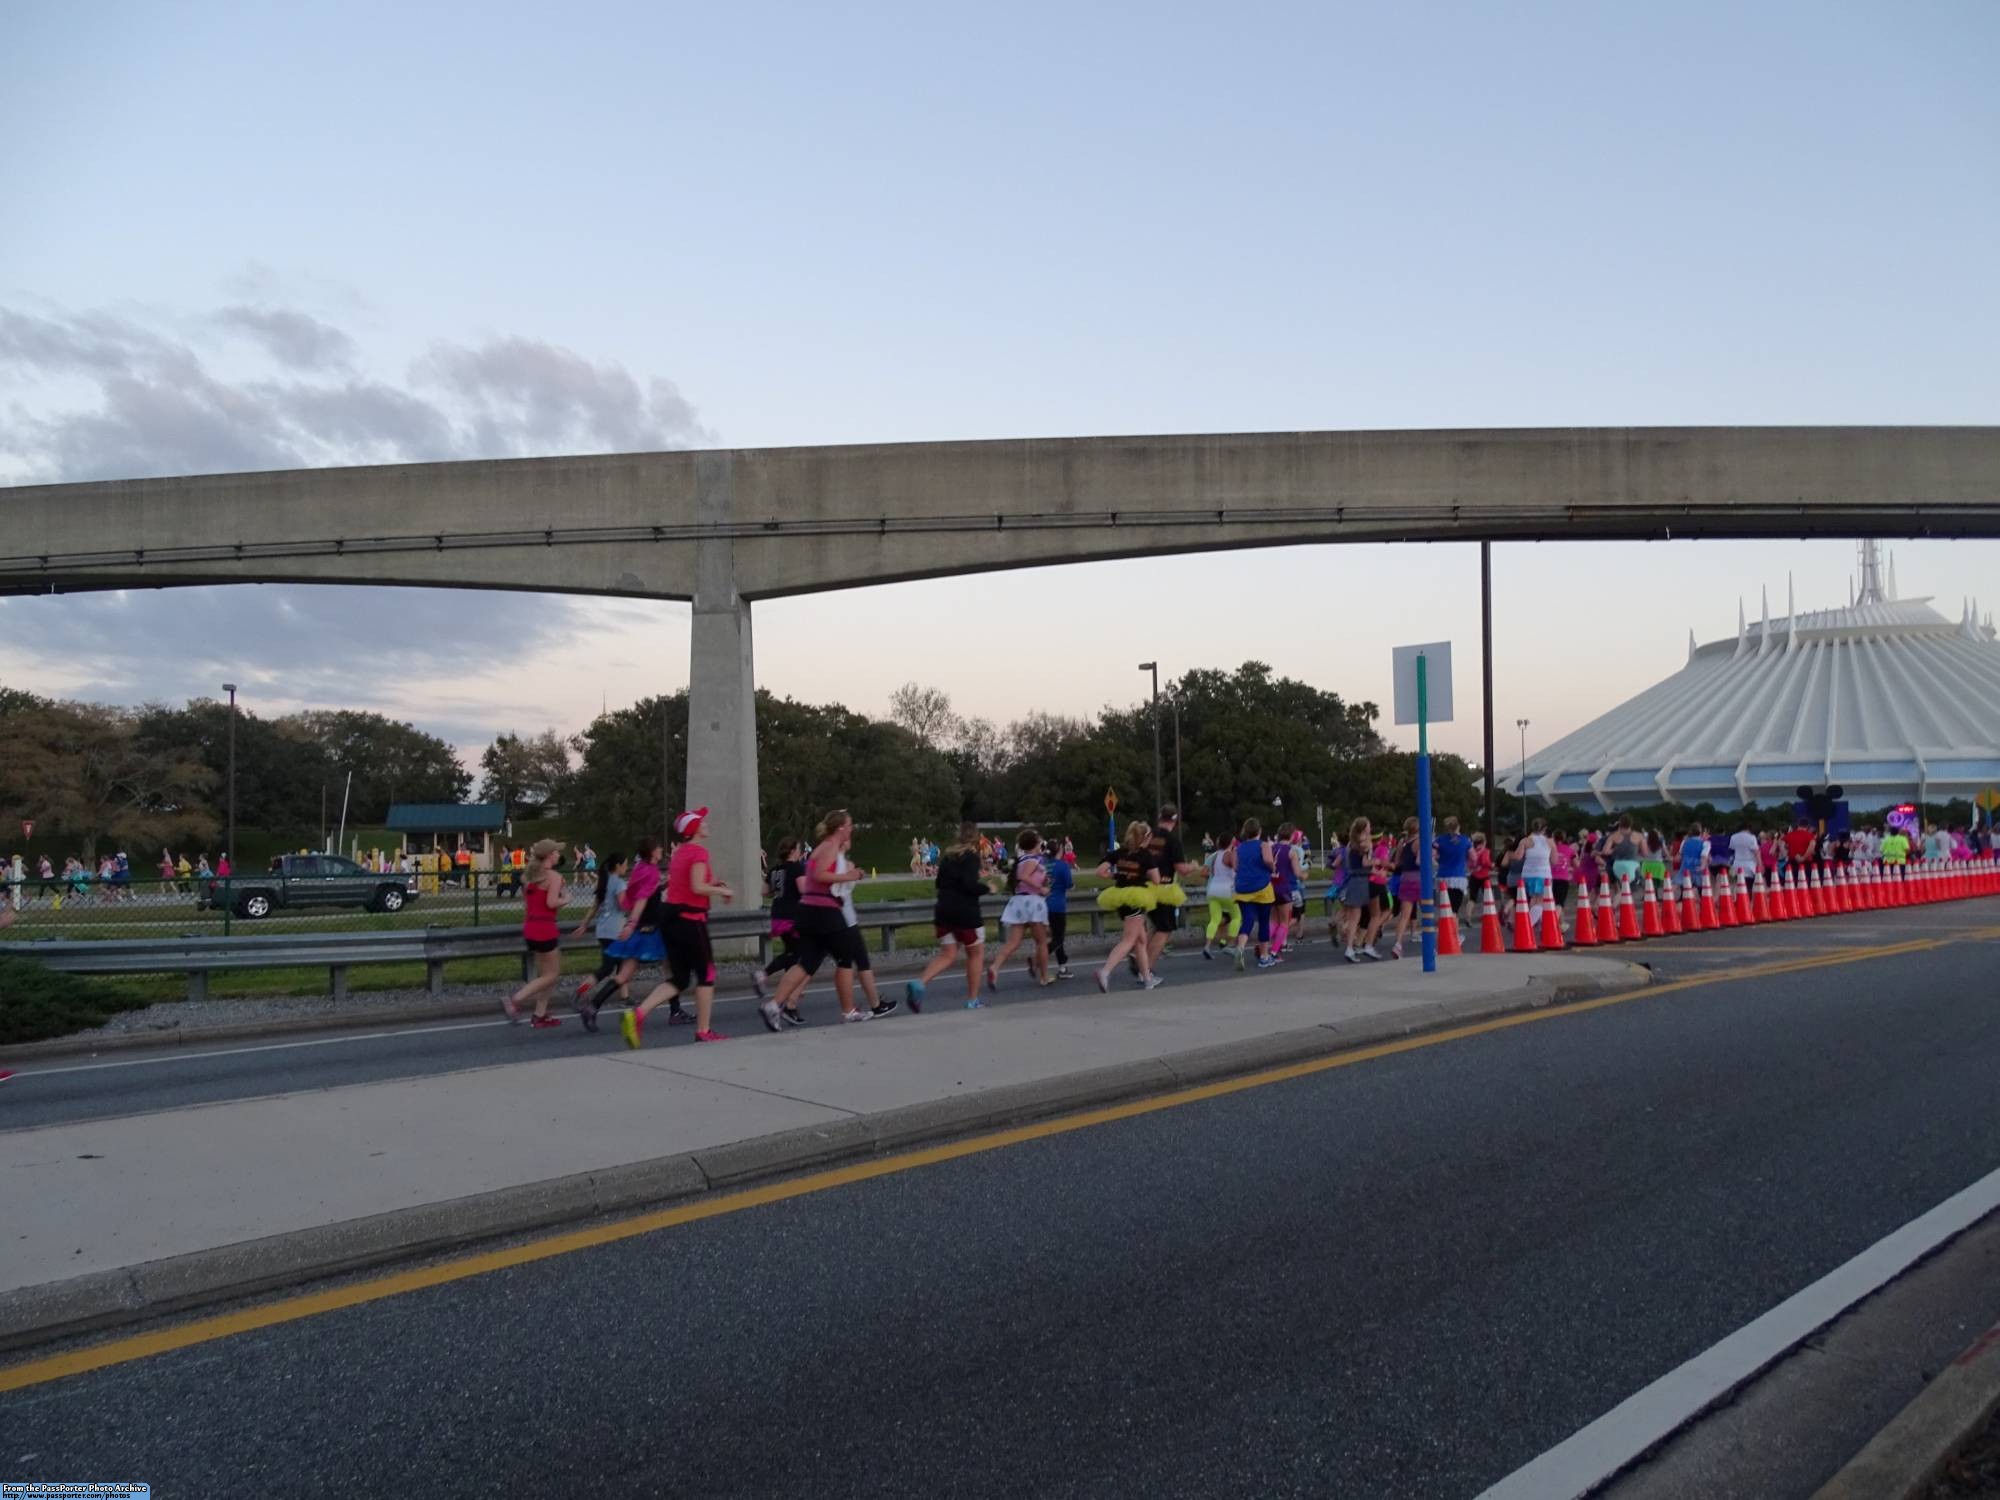 Learn about cheering on the runners at runDisney events! | PassPorter.com